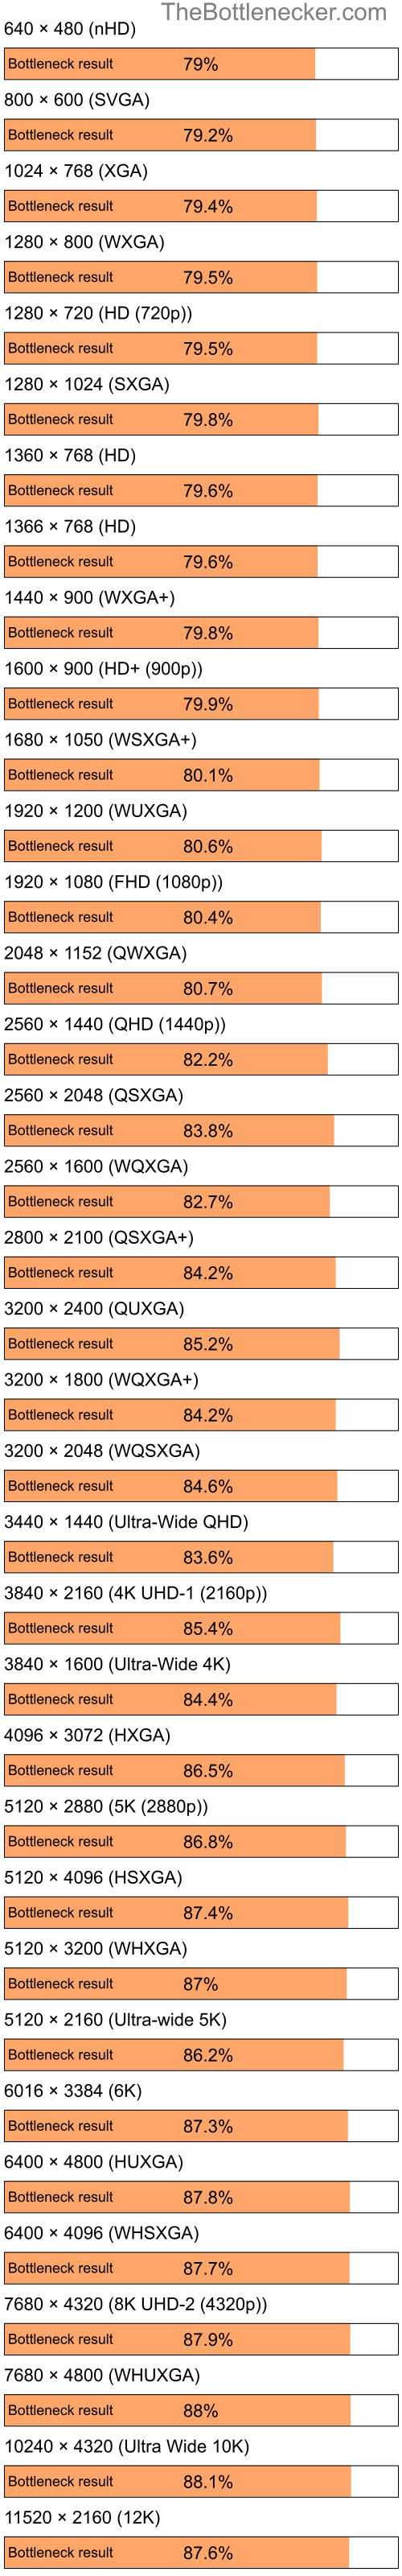 Bottleneck results by resolution for Intel Celeron M and AMD Radeon 9600 Family in General Tasks